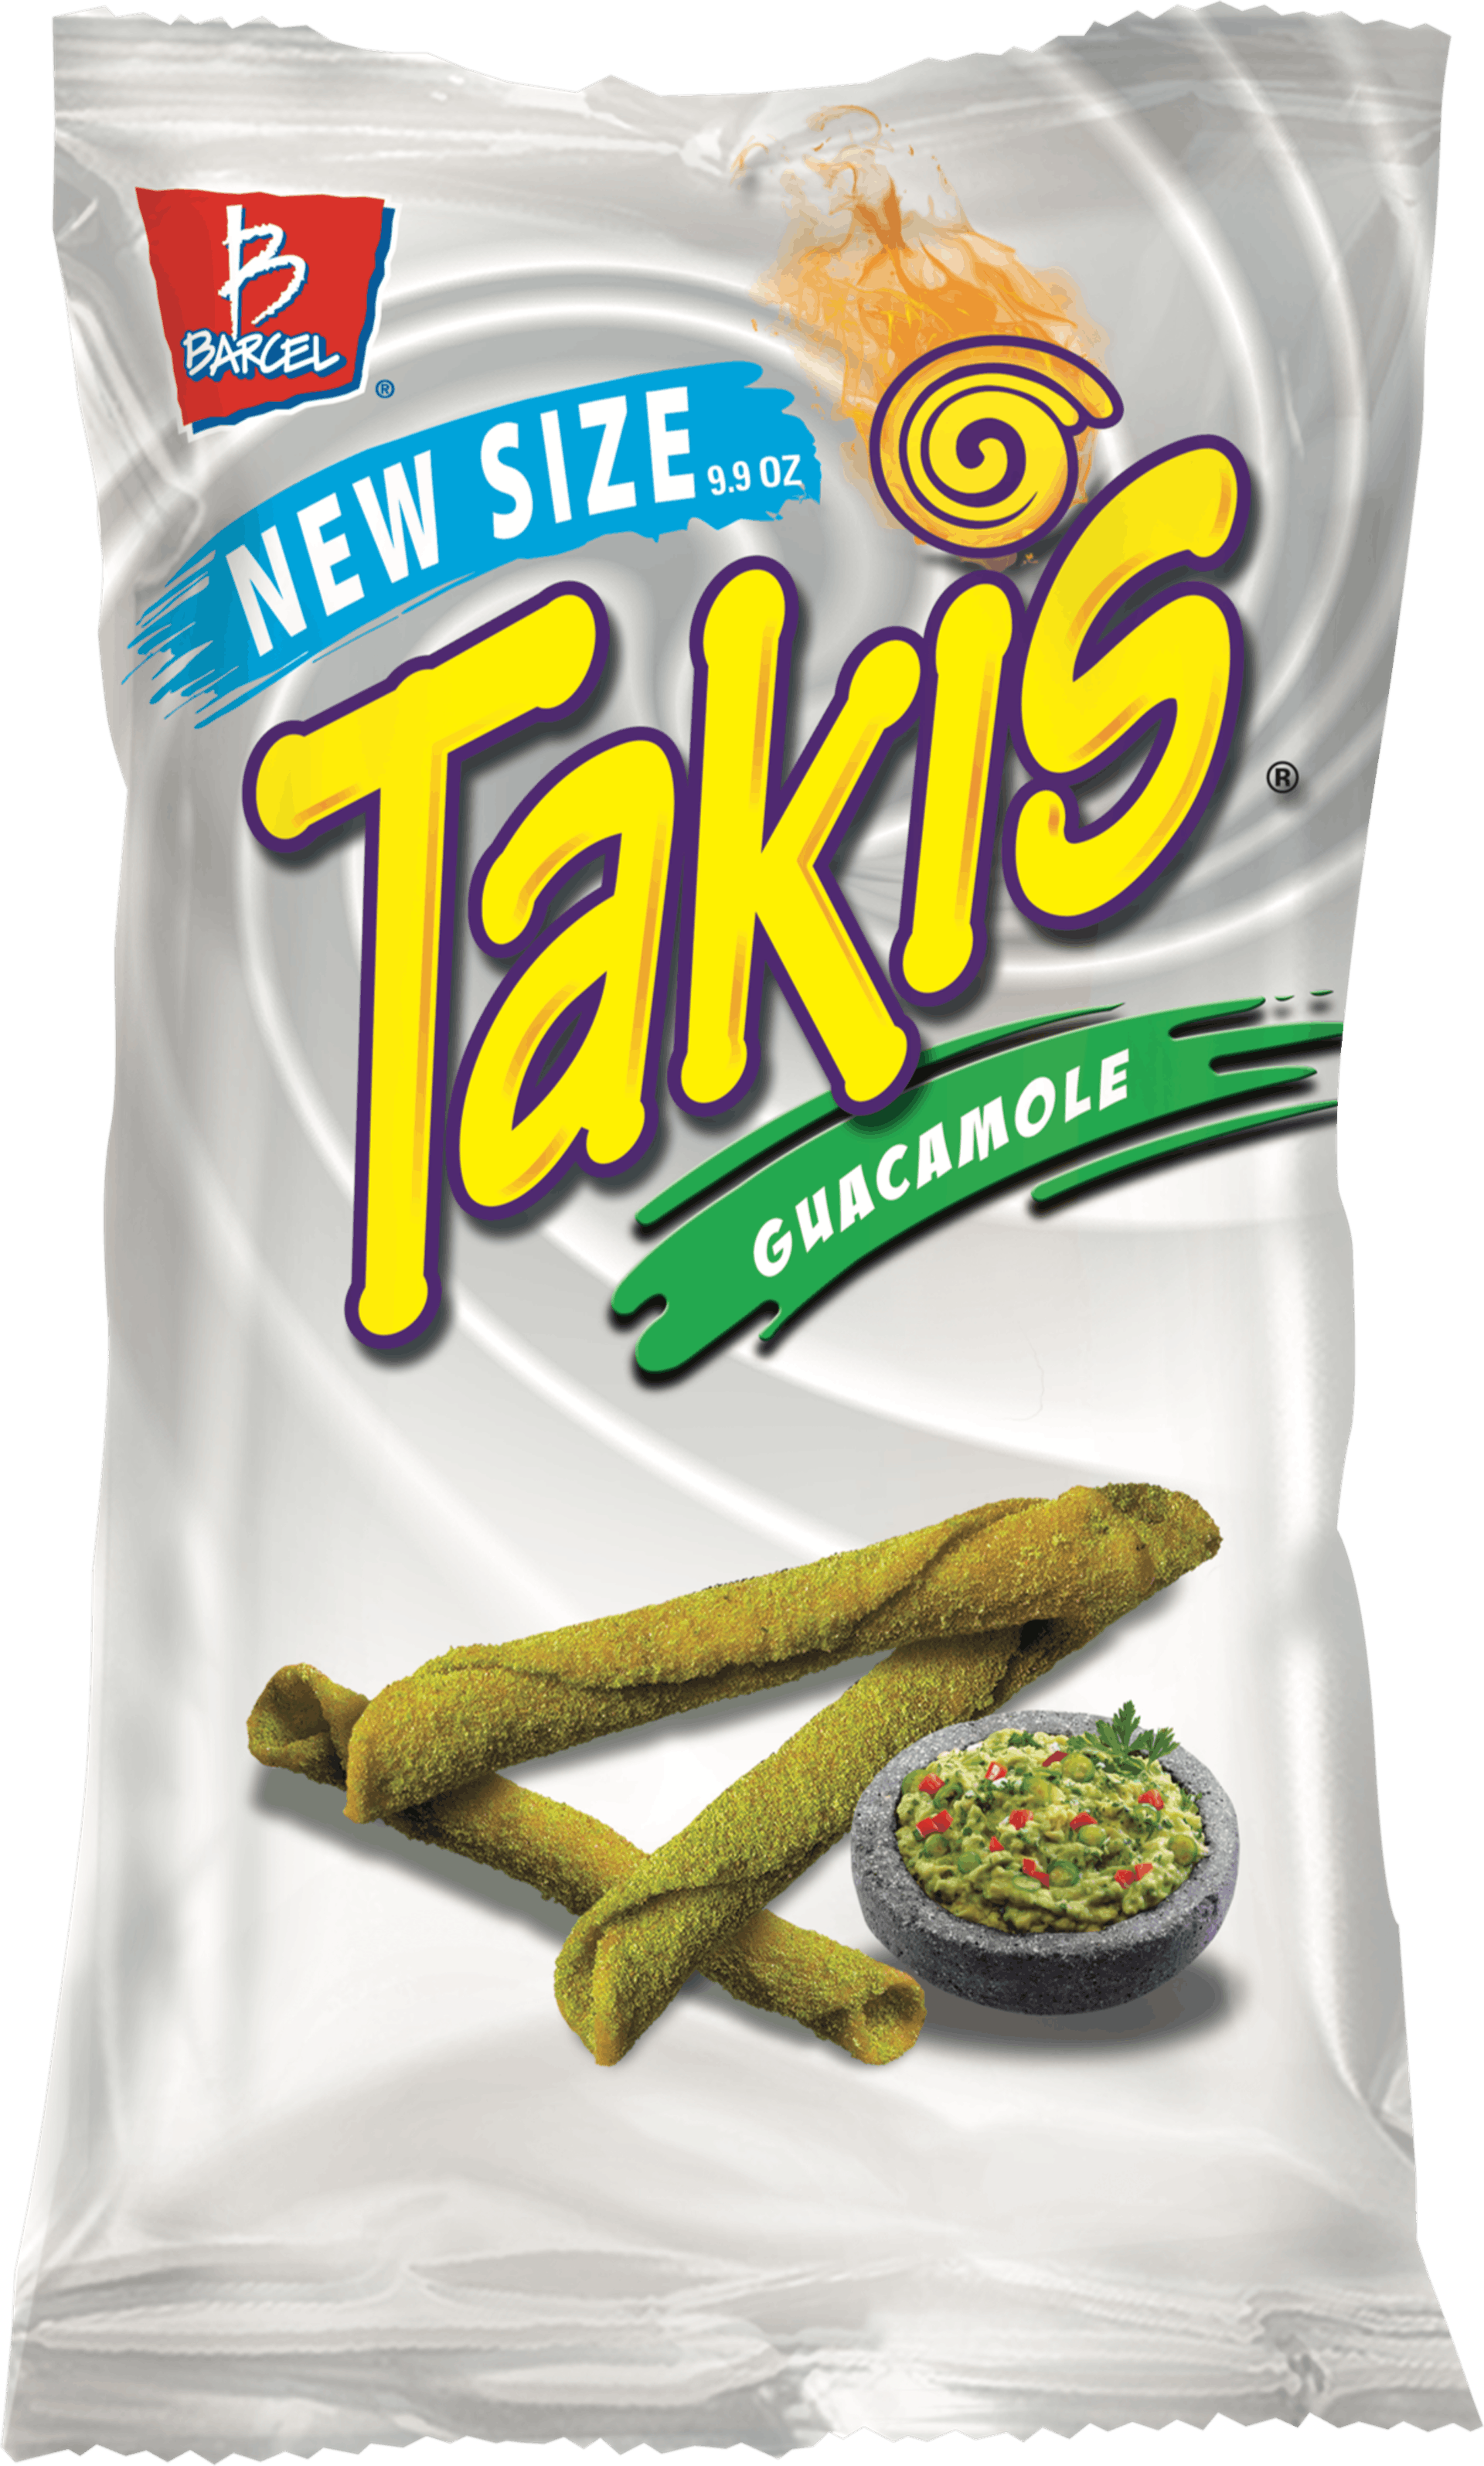 Takis Guacamole Flavored Snack Packaging